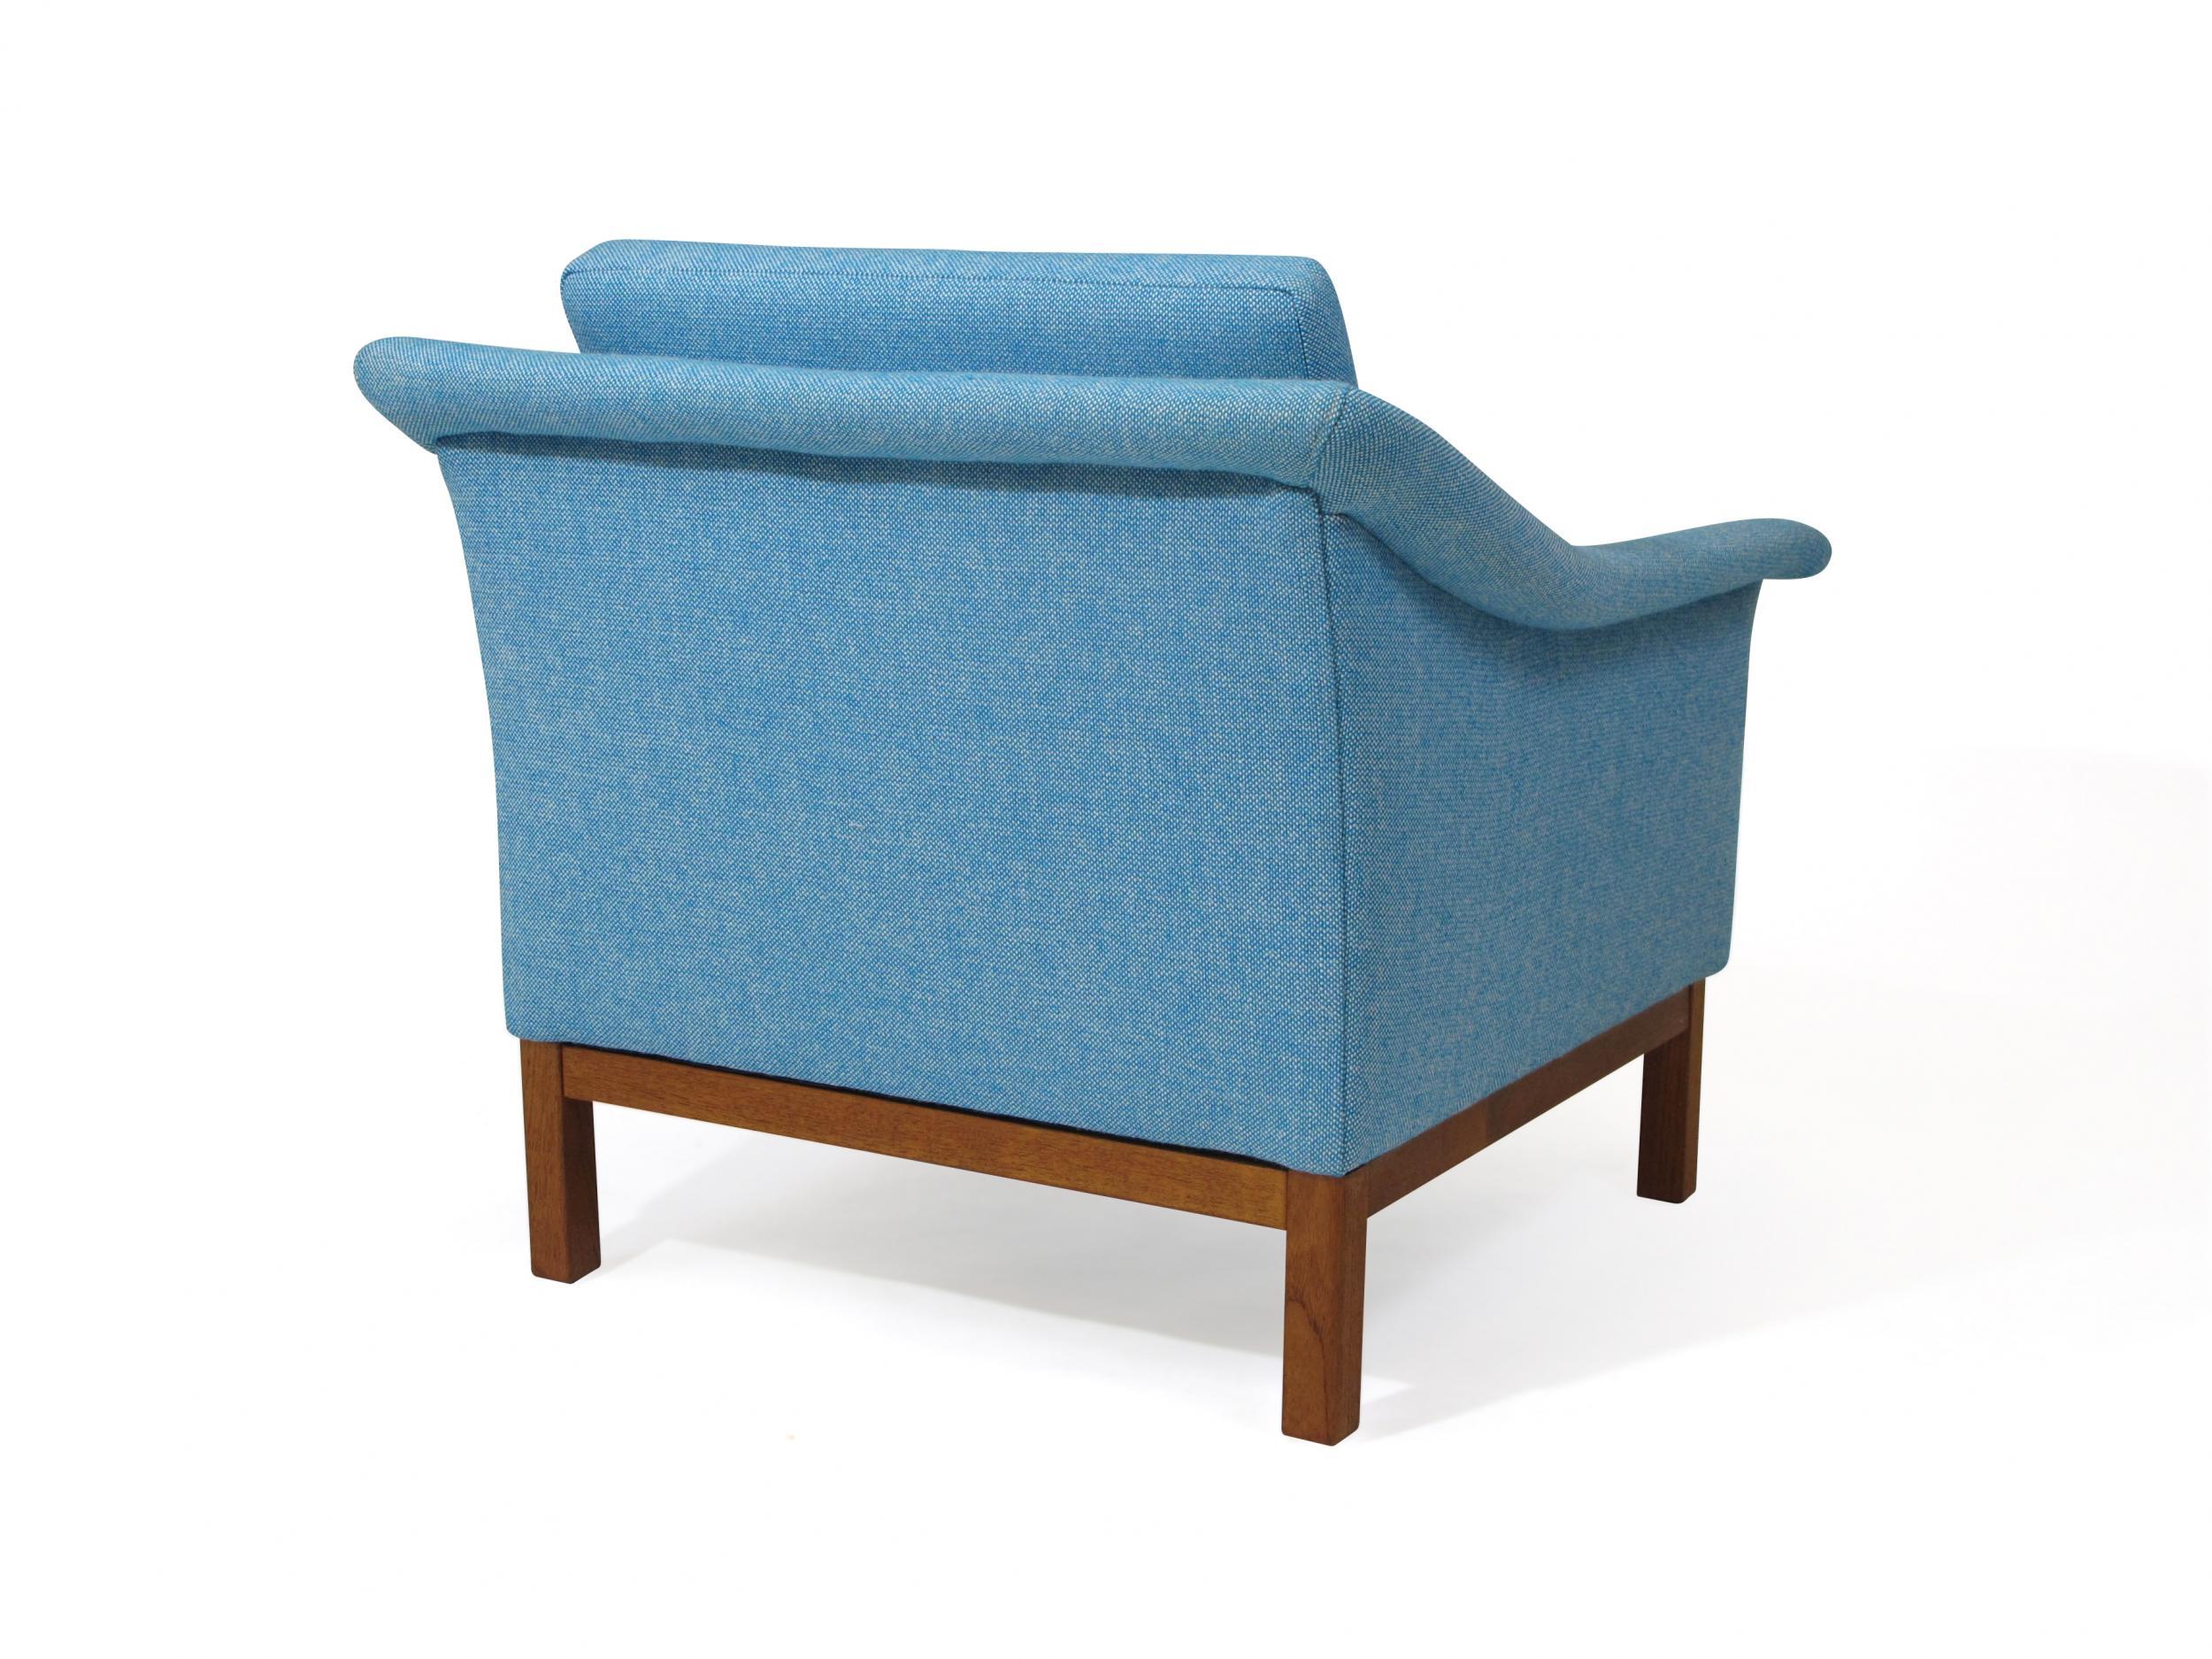 Wool Folke Ohlsson Mid-Century Danish Lounge Chair For Sale